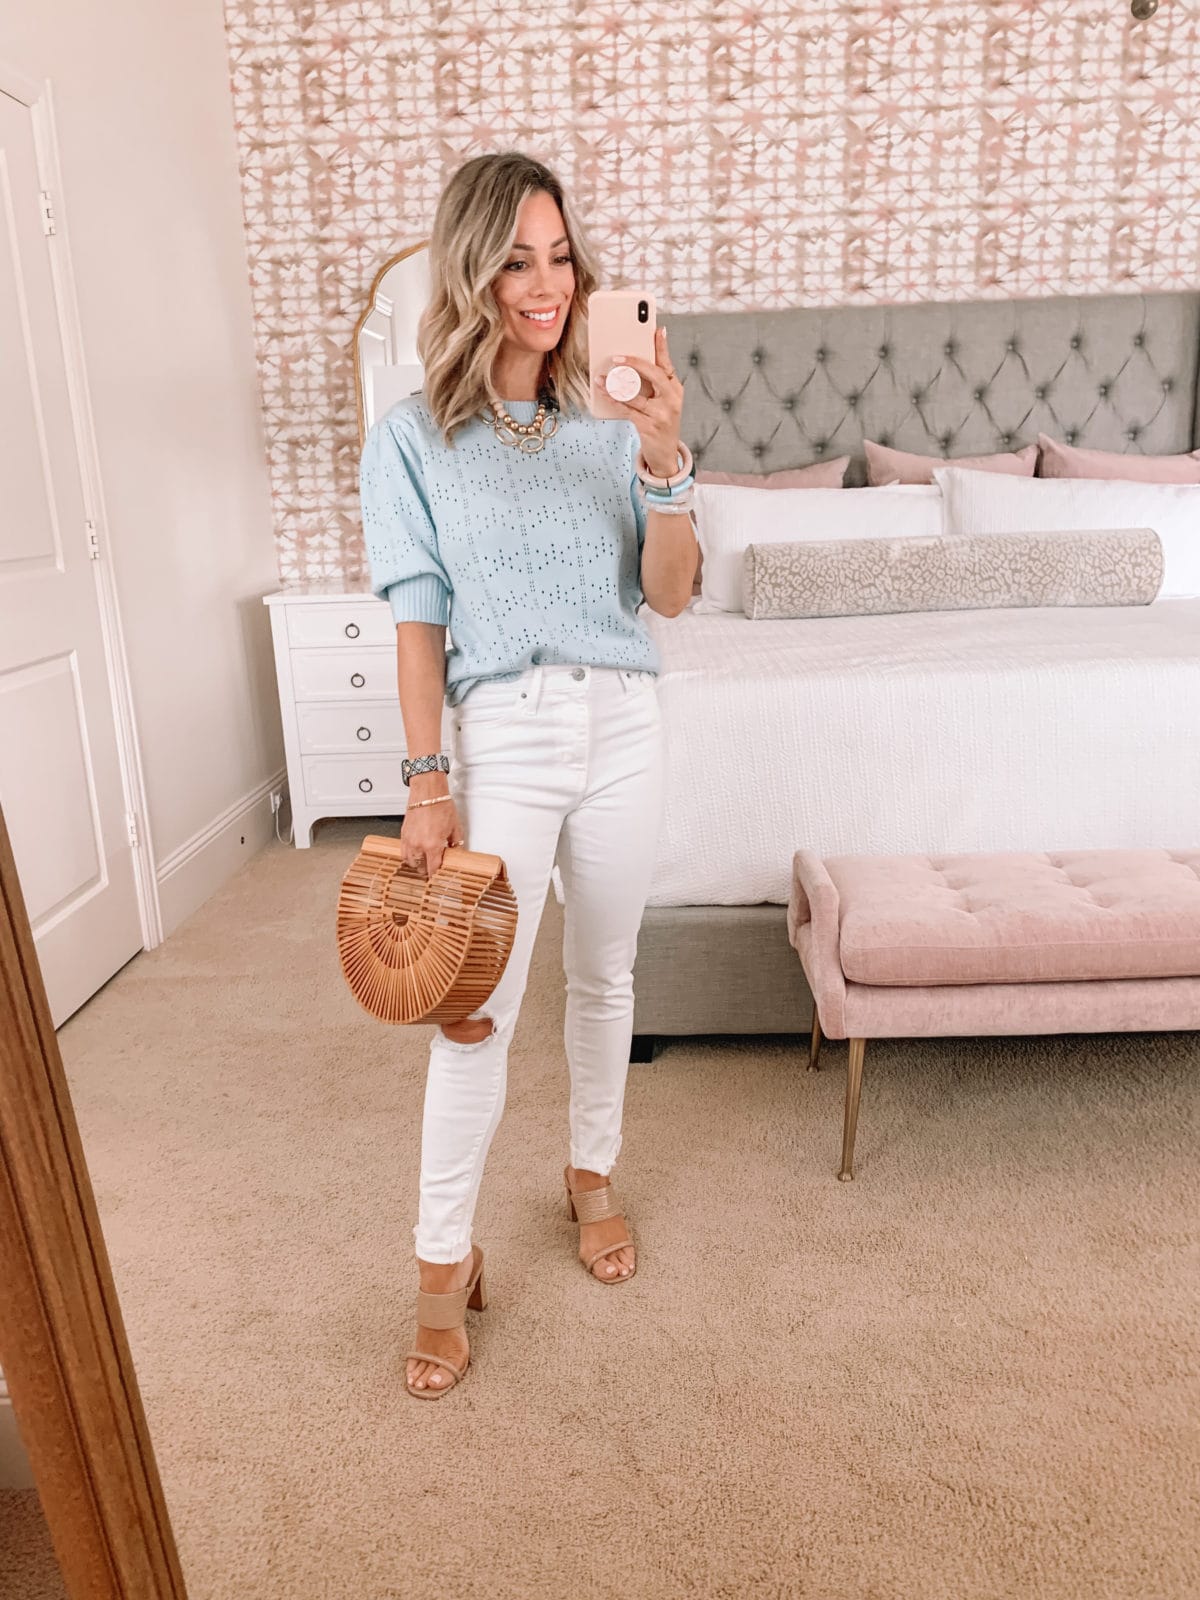 Amazon Fashion Faves, Blue Sweater Short Sleeved, Jeans, Bamboo Clutch 